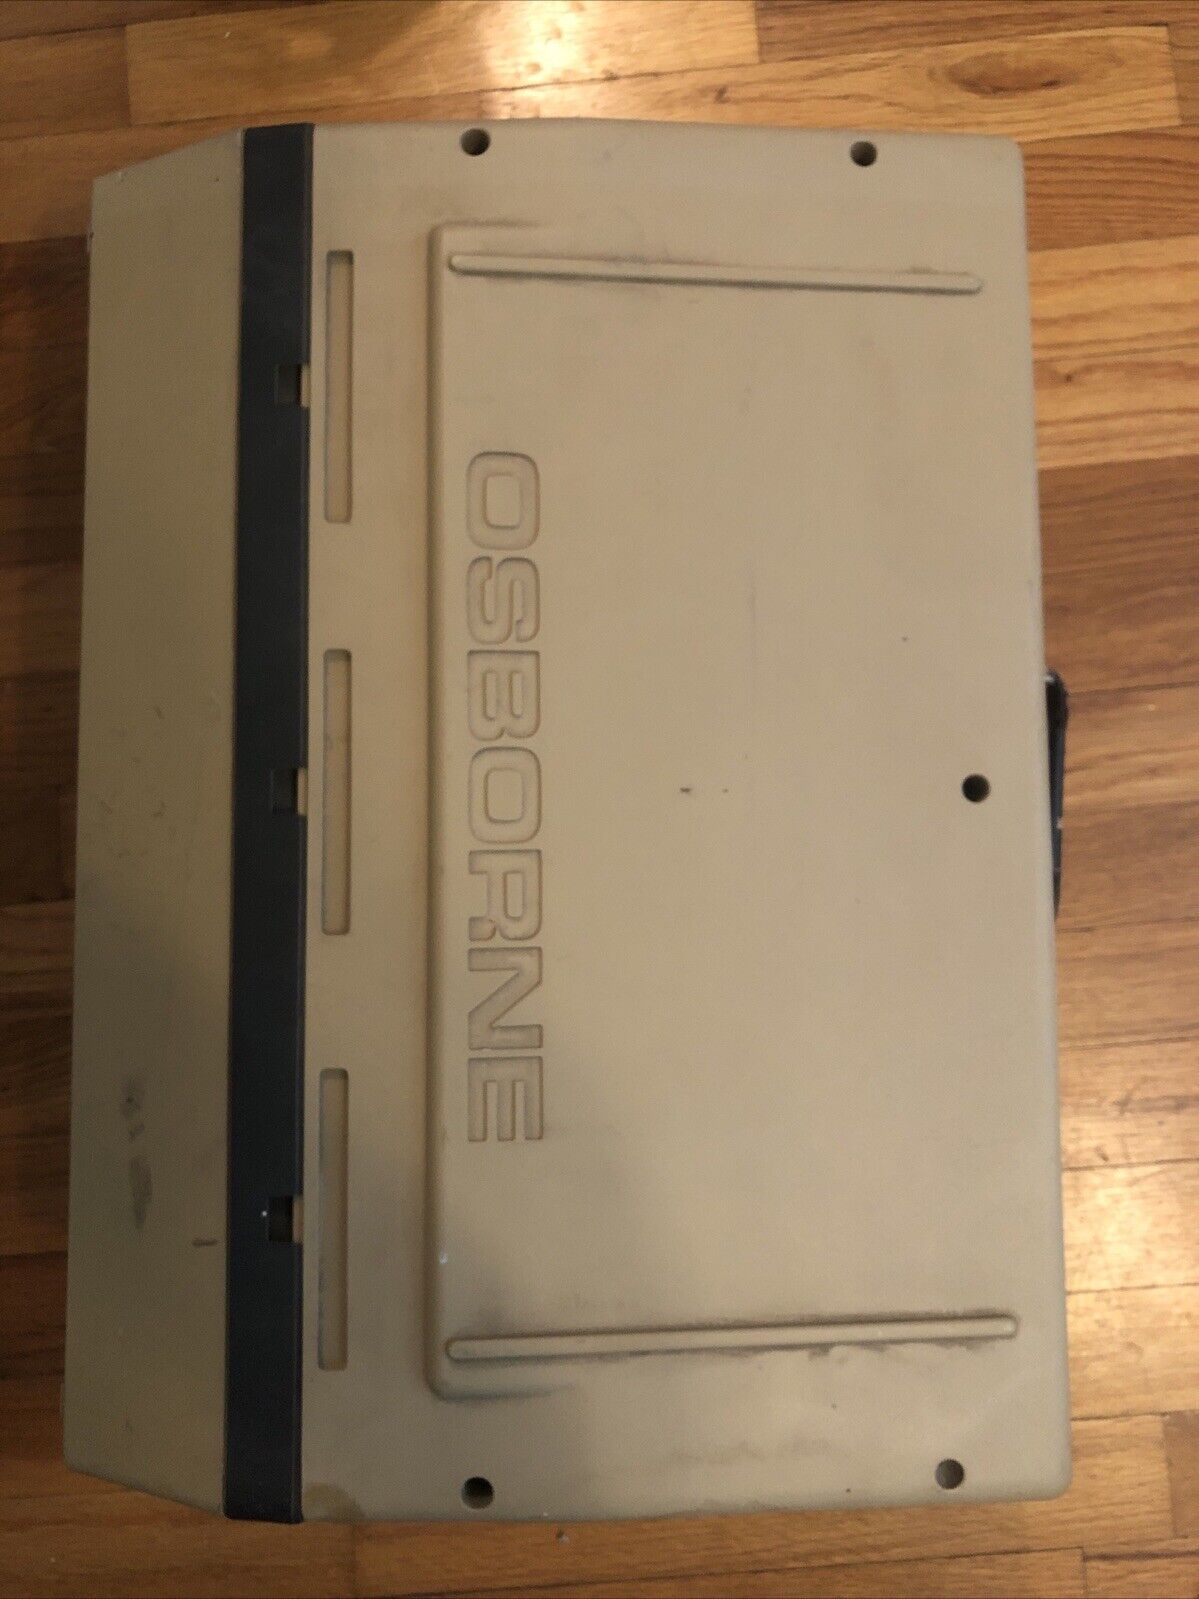 Osborne 1 Computer, Powers On, Comes with Some Disks and Accessories